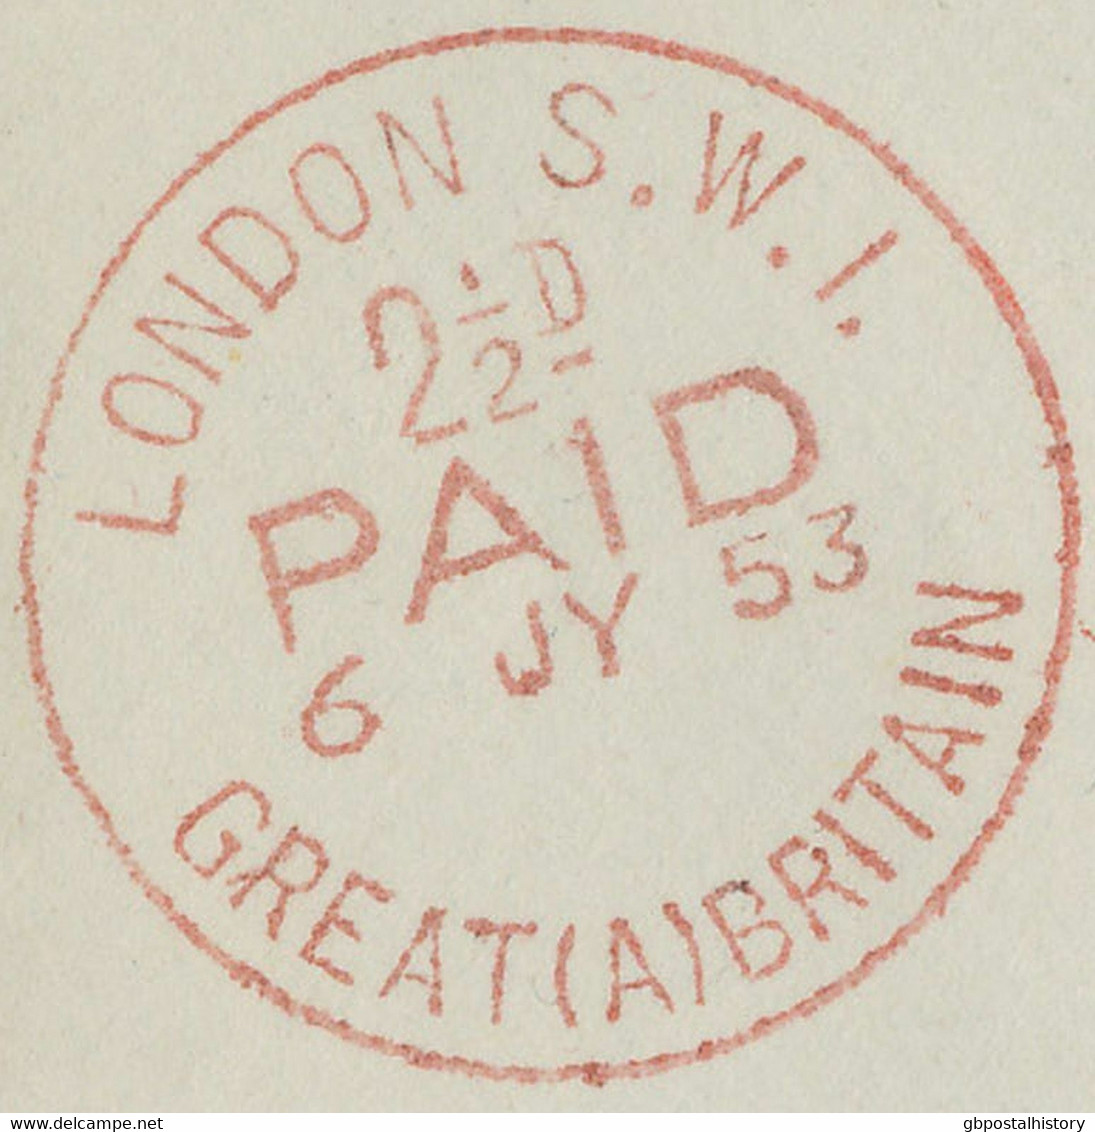 GB "LONDON S.W.I. / 2 1/2 D. / PAID / 6 JY 53 / GREAT (A) BRITAIN" Roter CDS Cvr - Oficiales